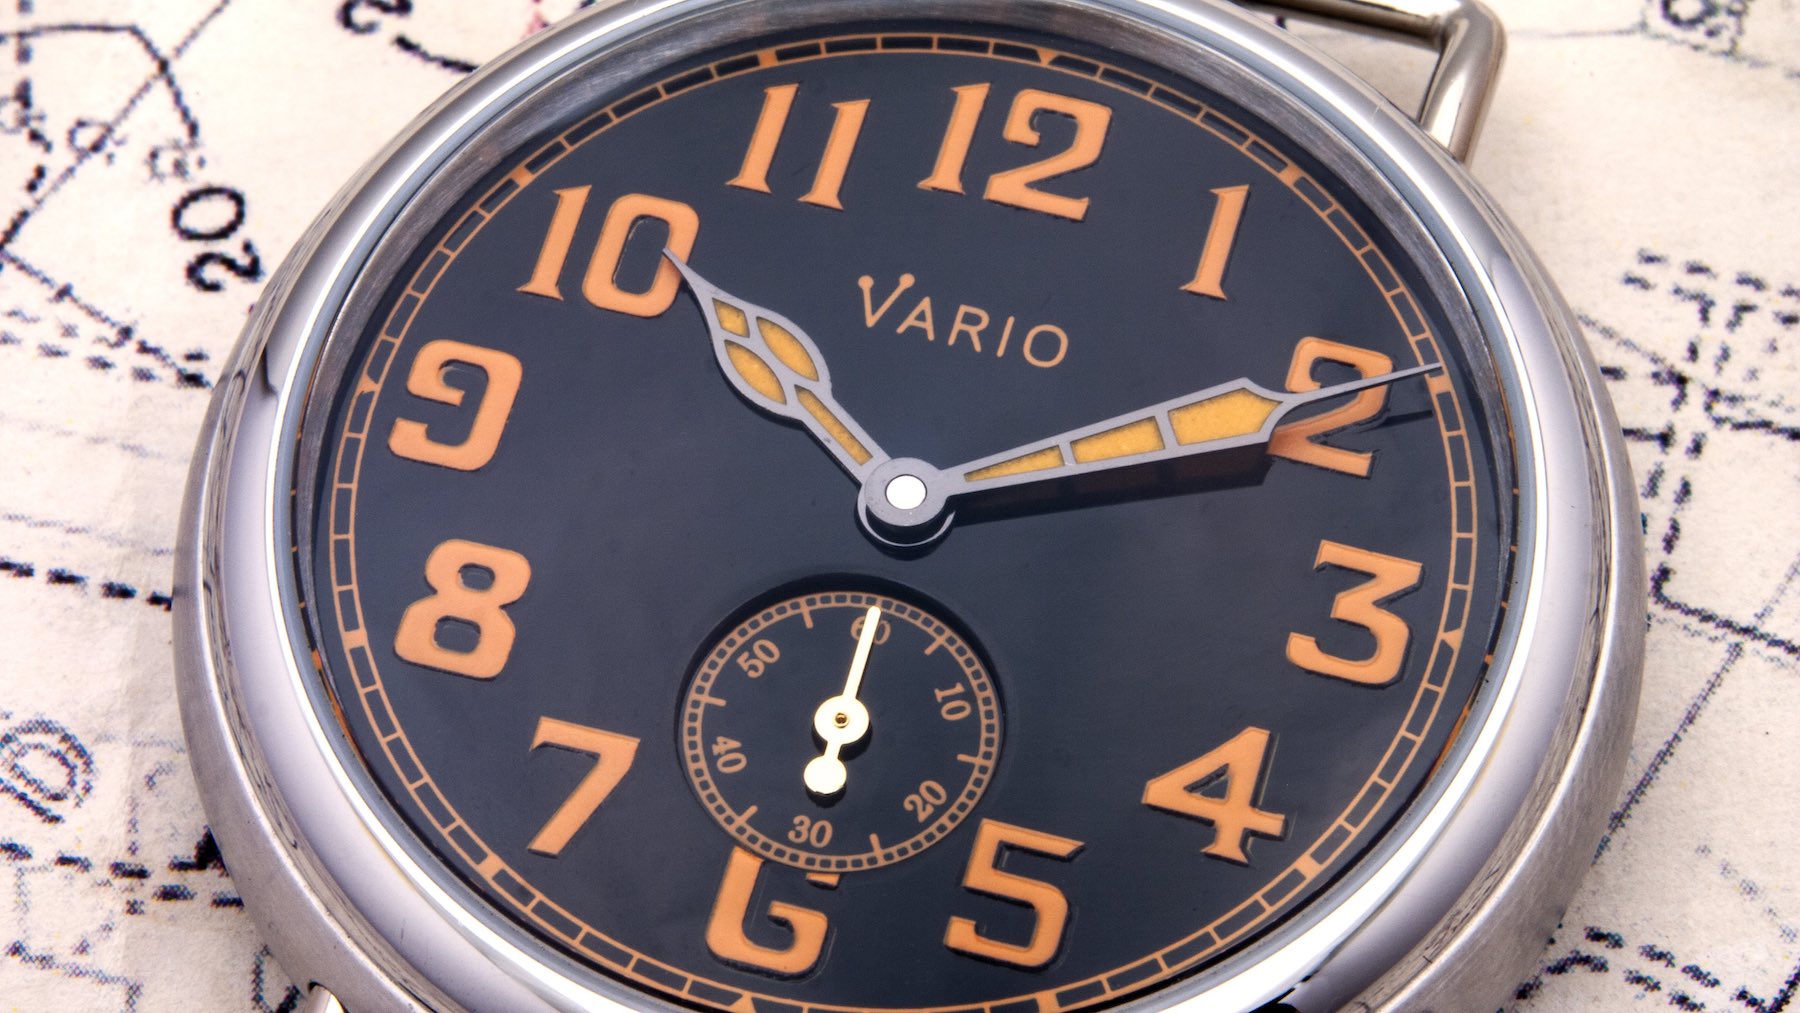 Vario WW1 Trench Watch